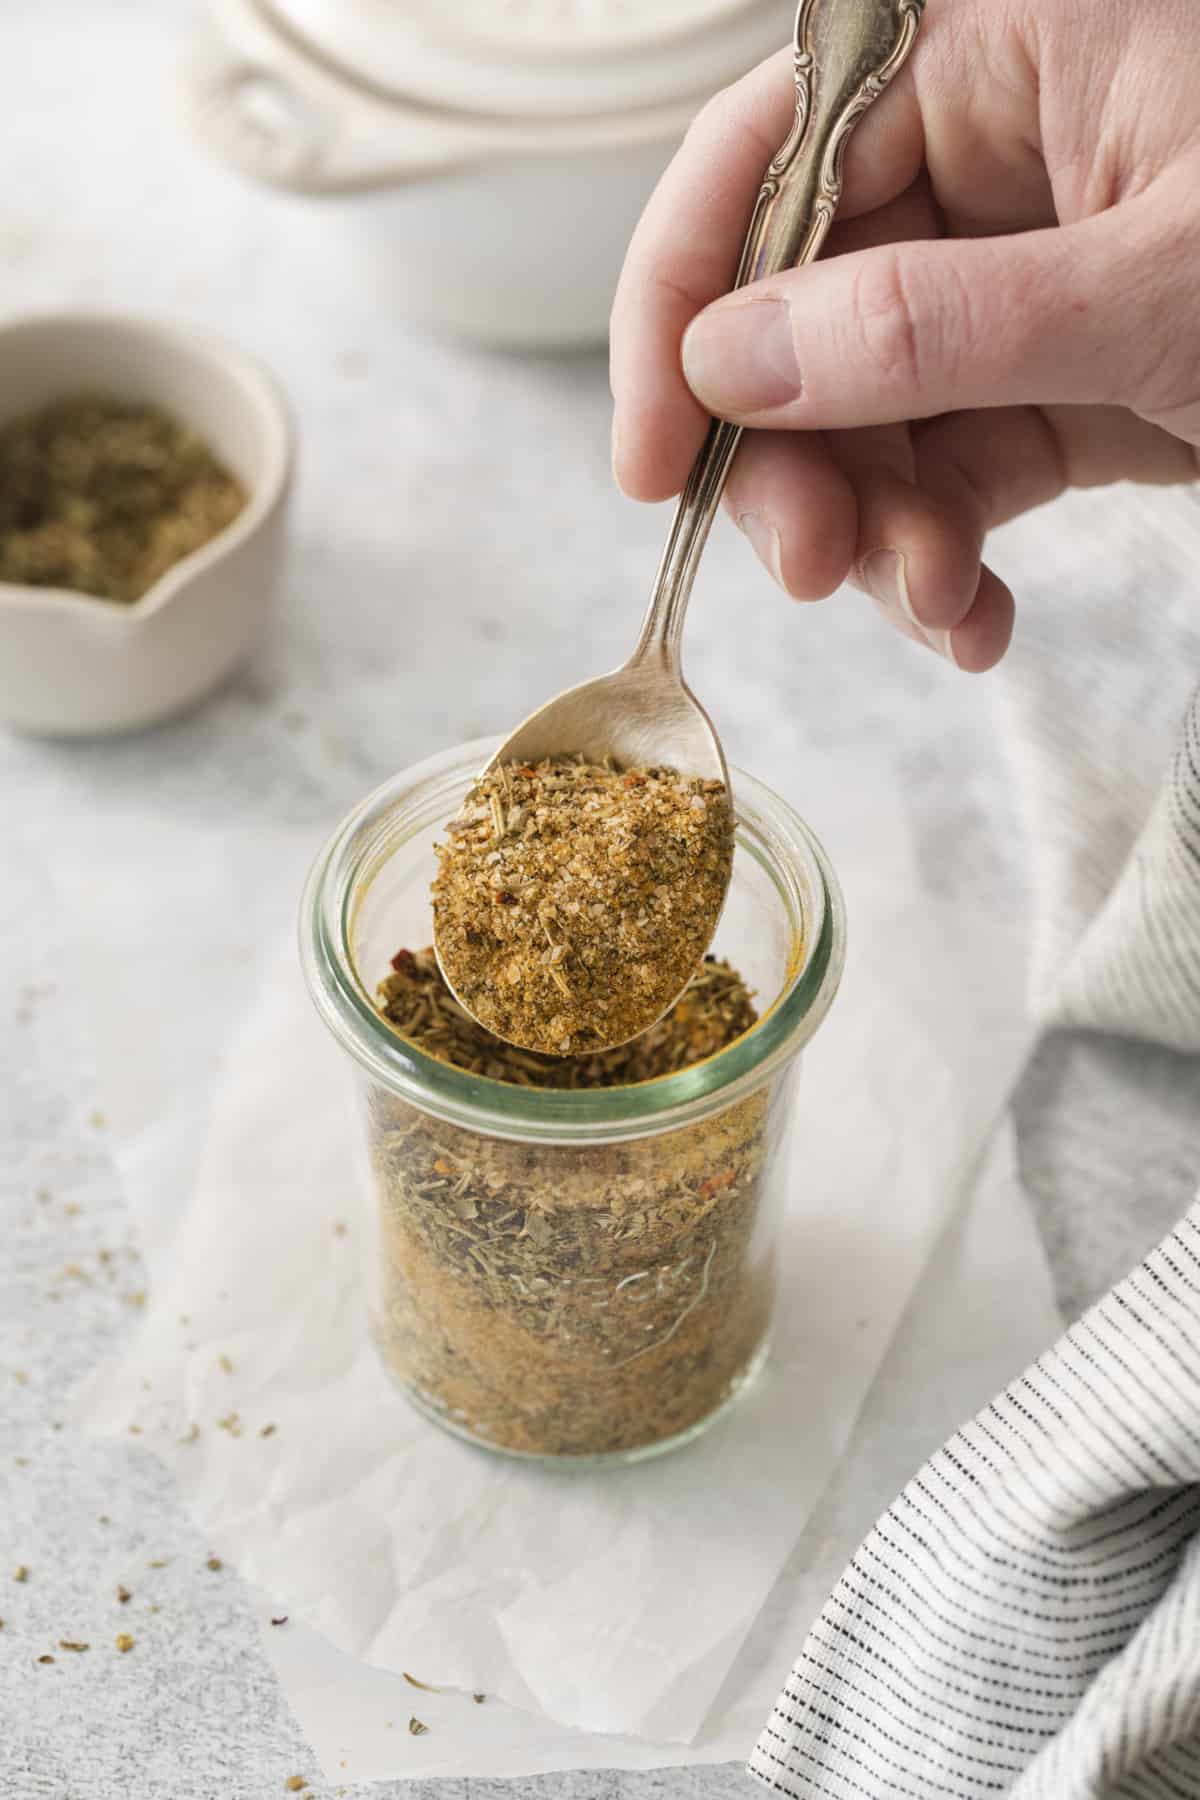 A spoonful of chicken dry grater is scooped out of a jar.